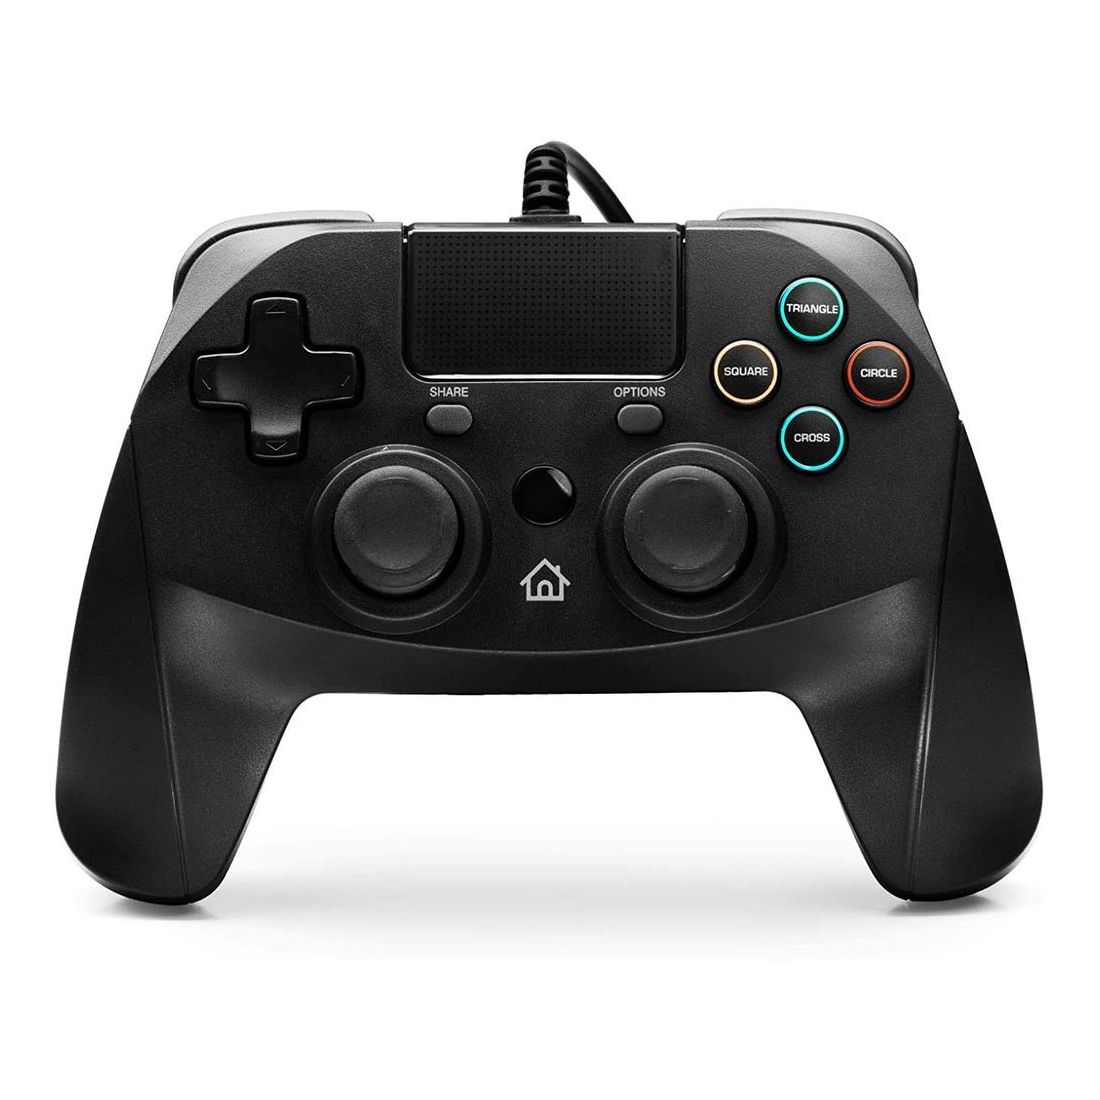 Snakebyte Game Pad 4 S Black for PS4